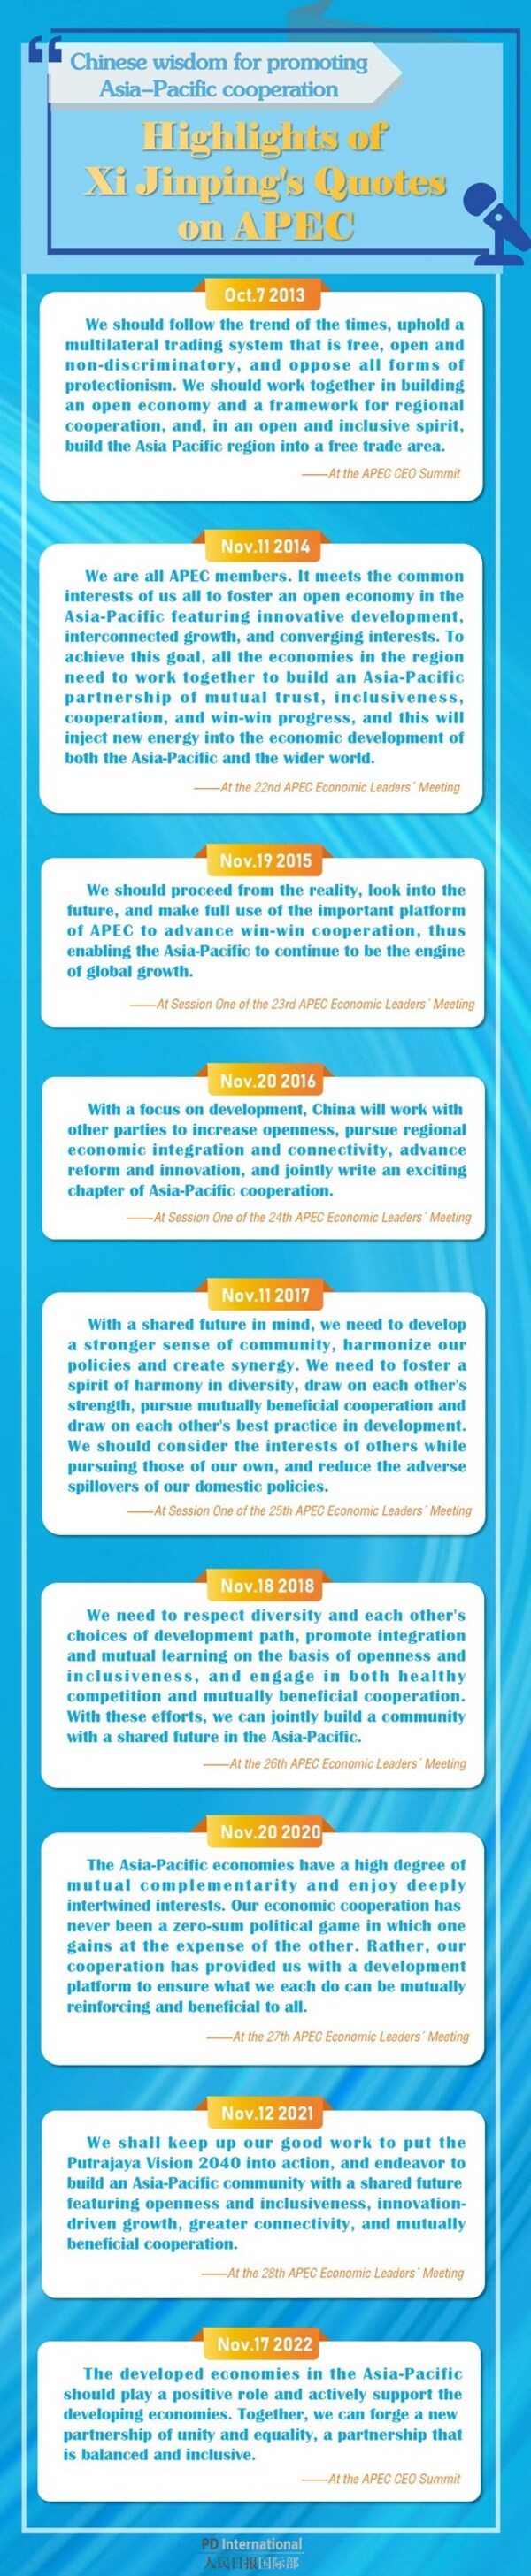 Highlights of Xi Jinping's Quotes on APEC